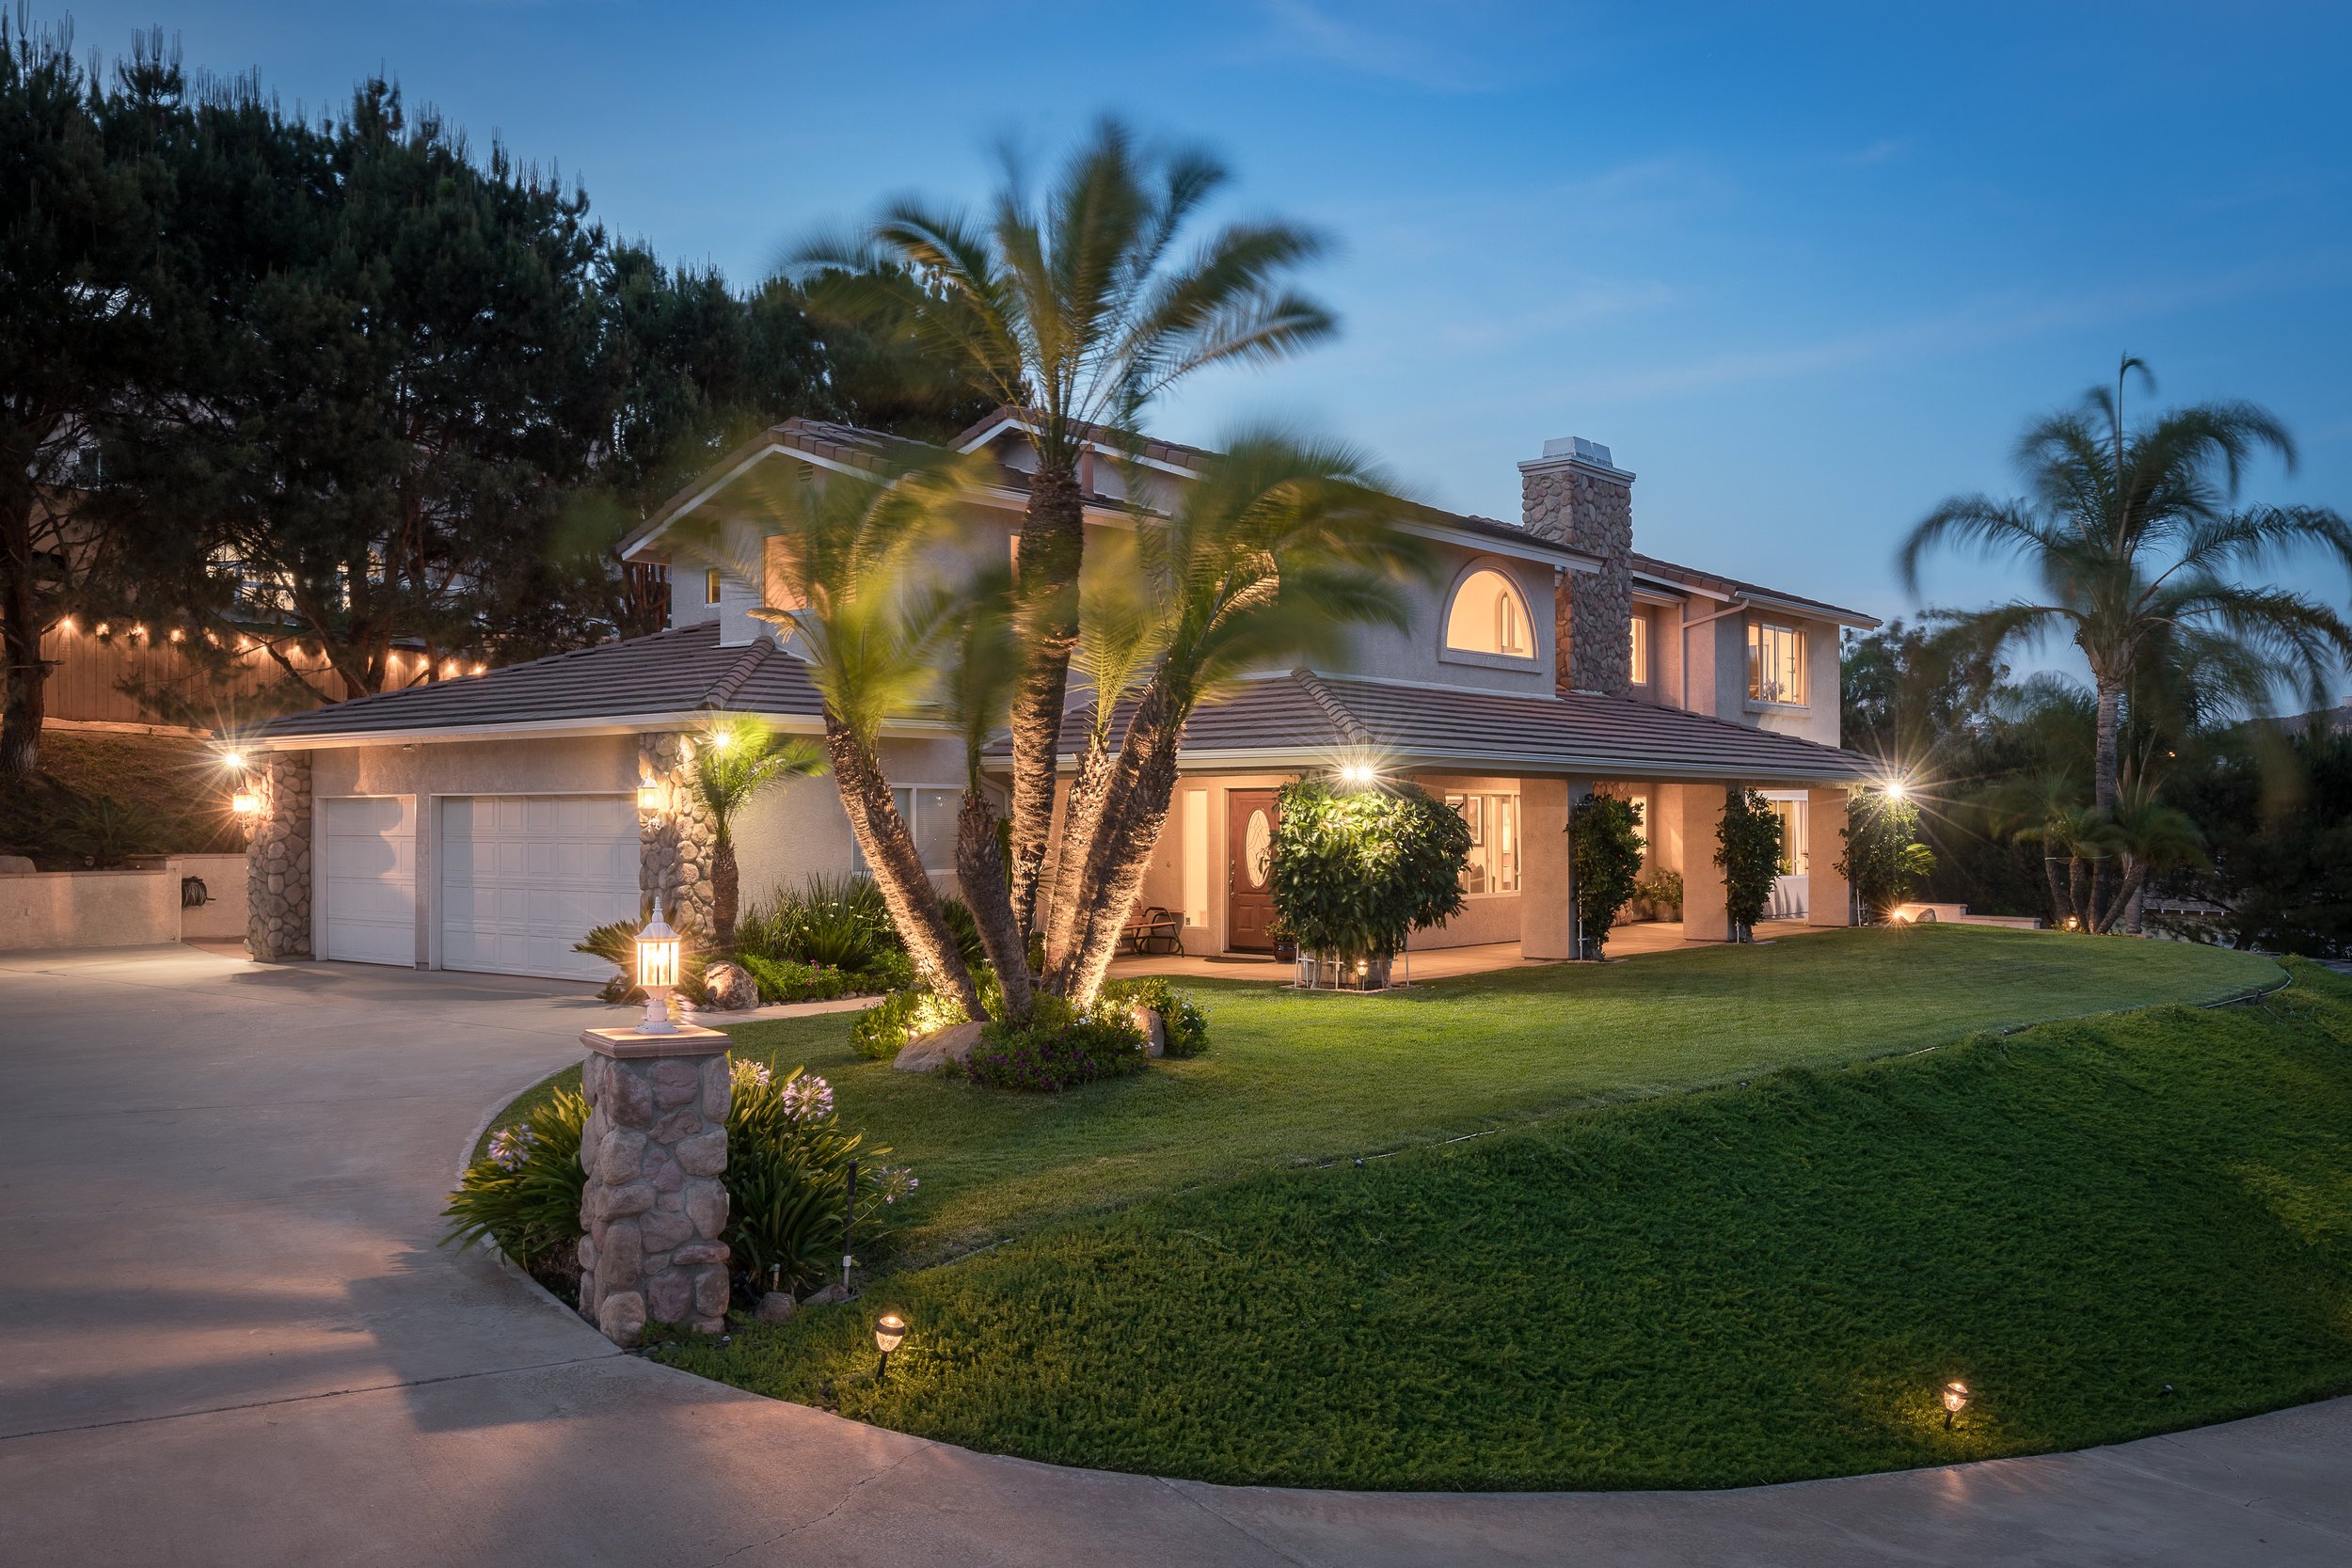 Twilight Photo of a San Diego Listing by Beautiful Listings - Real Estate Photography and Videography